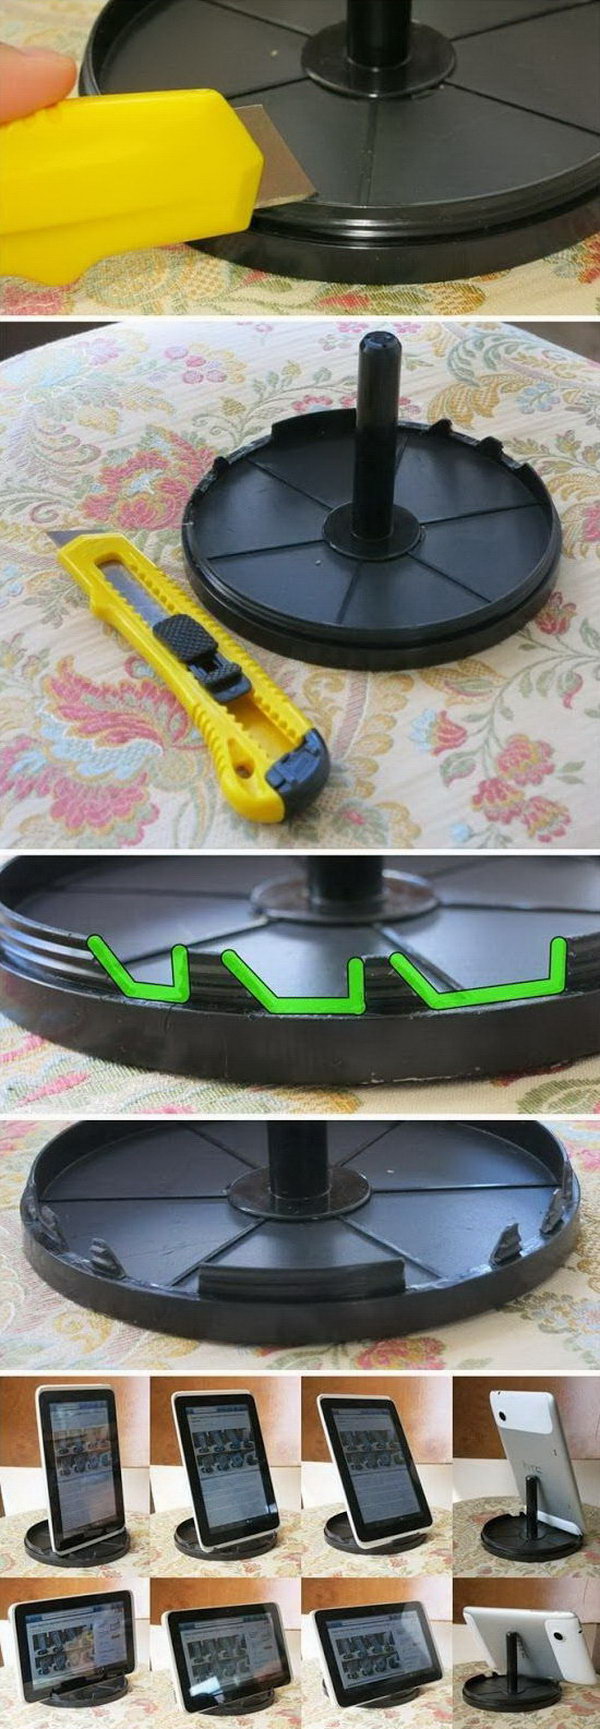 DIY CD spindle iPad stand. It is super easy to create an iPad stand from the CD Spinder. 